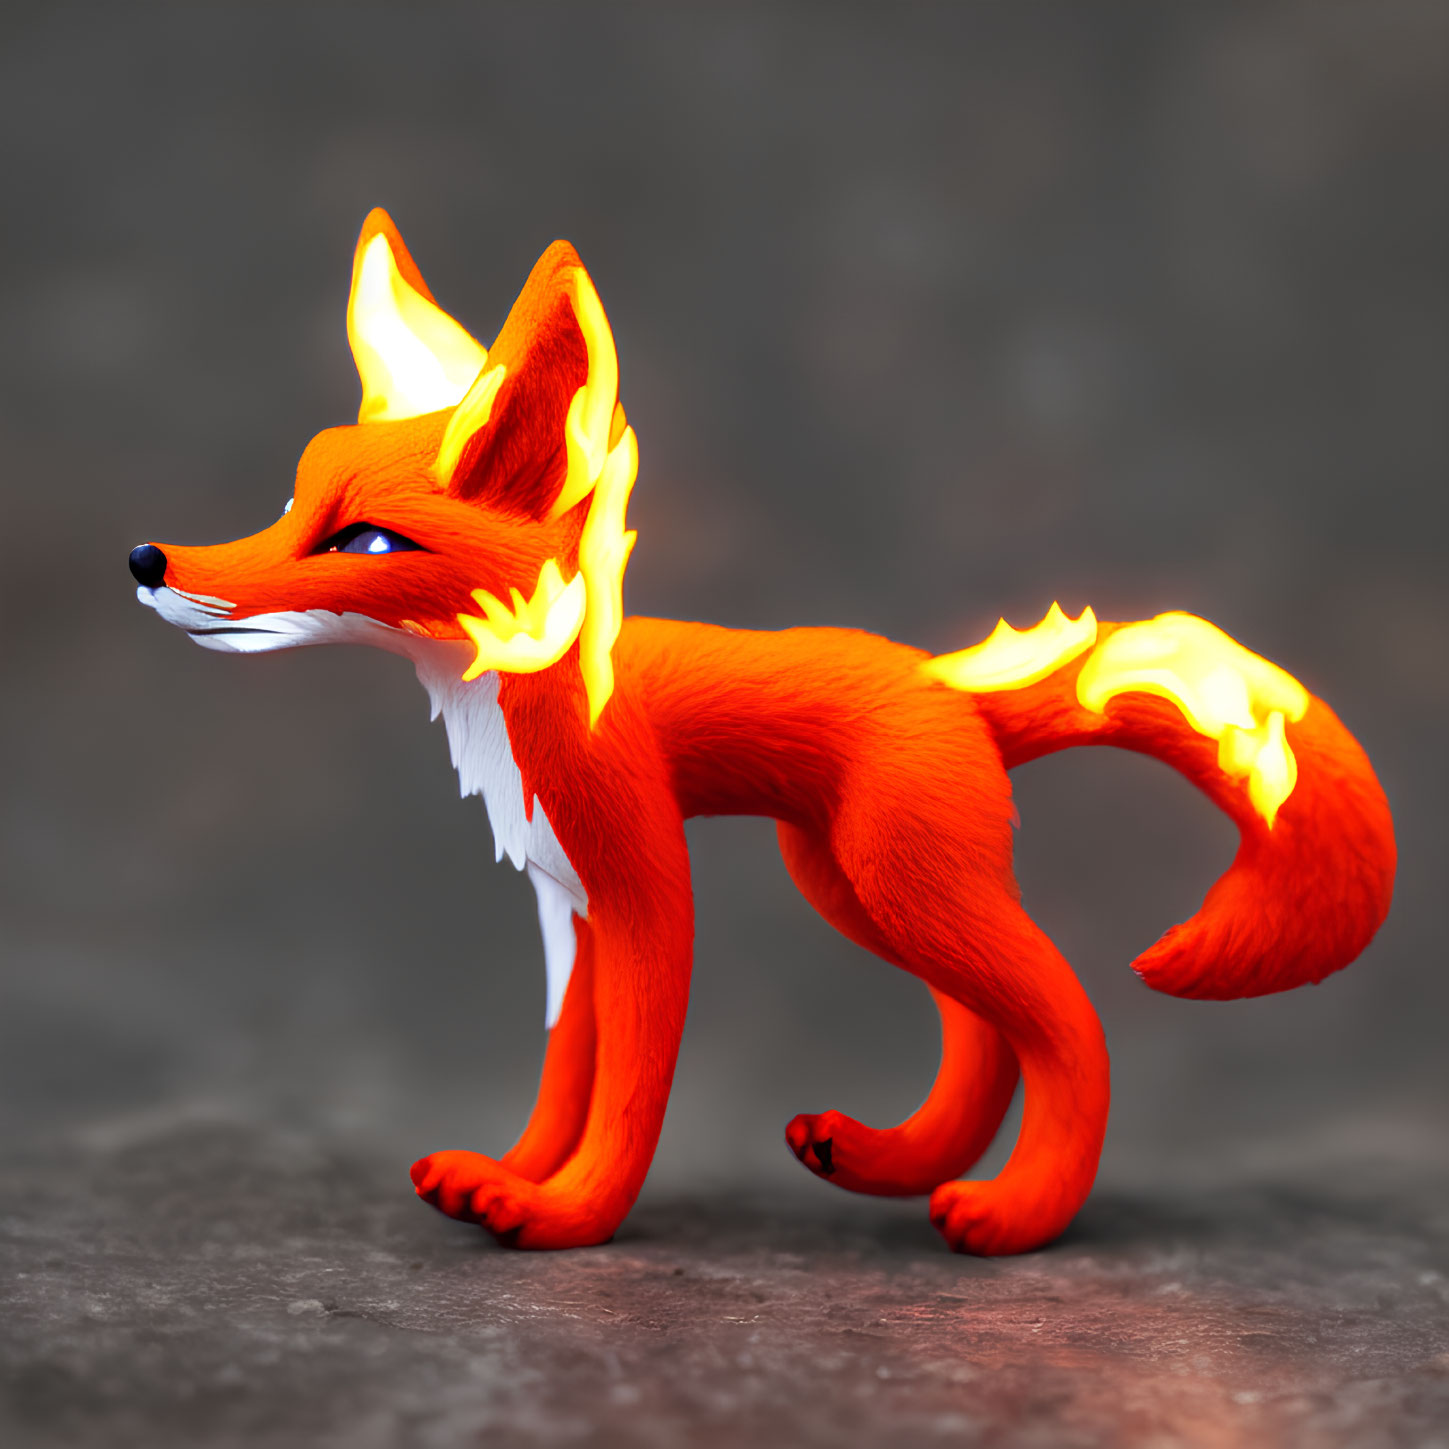 Colorful Fox Figurine with Flame Design on Ears, Tail, and Feet